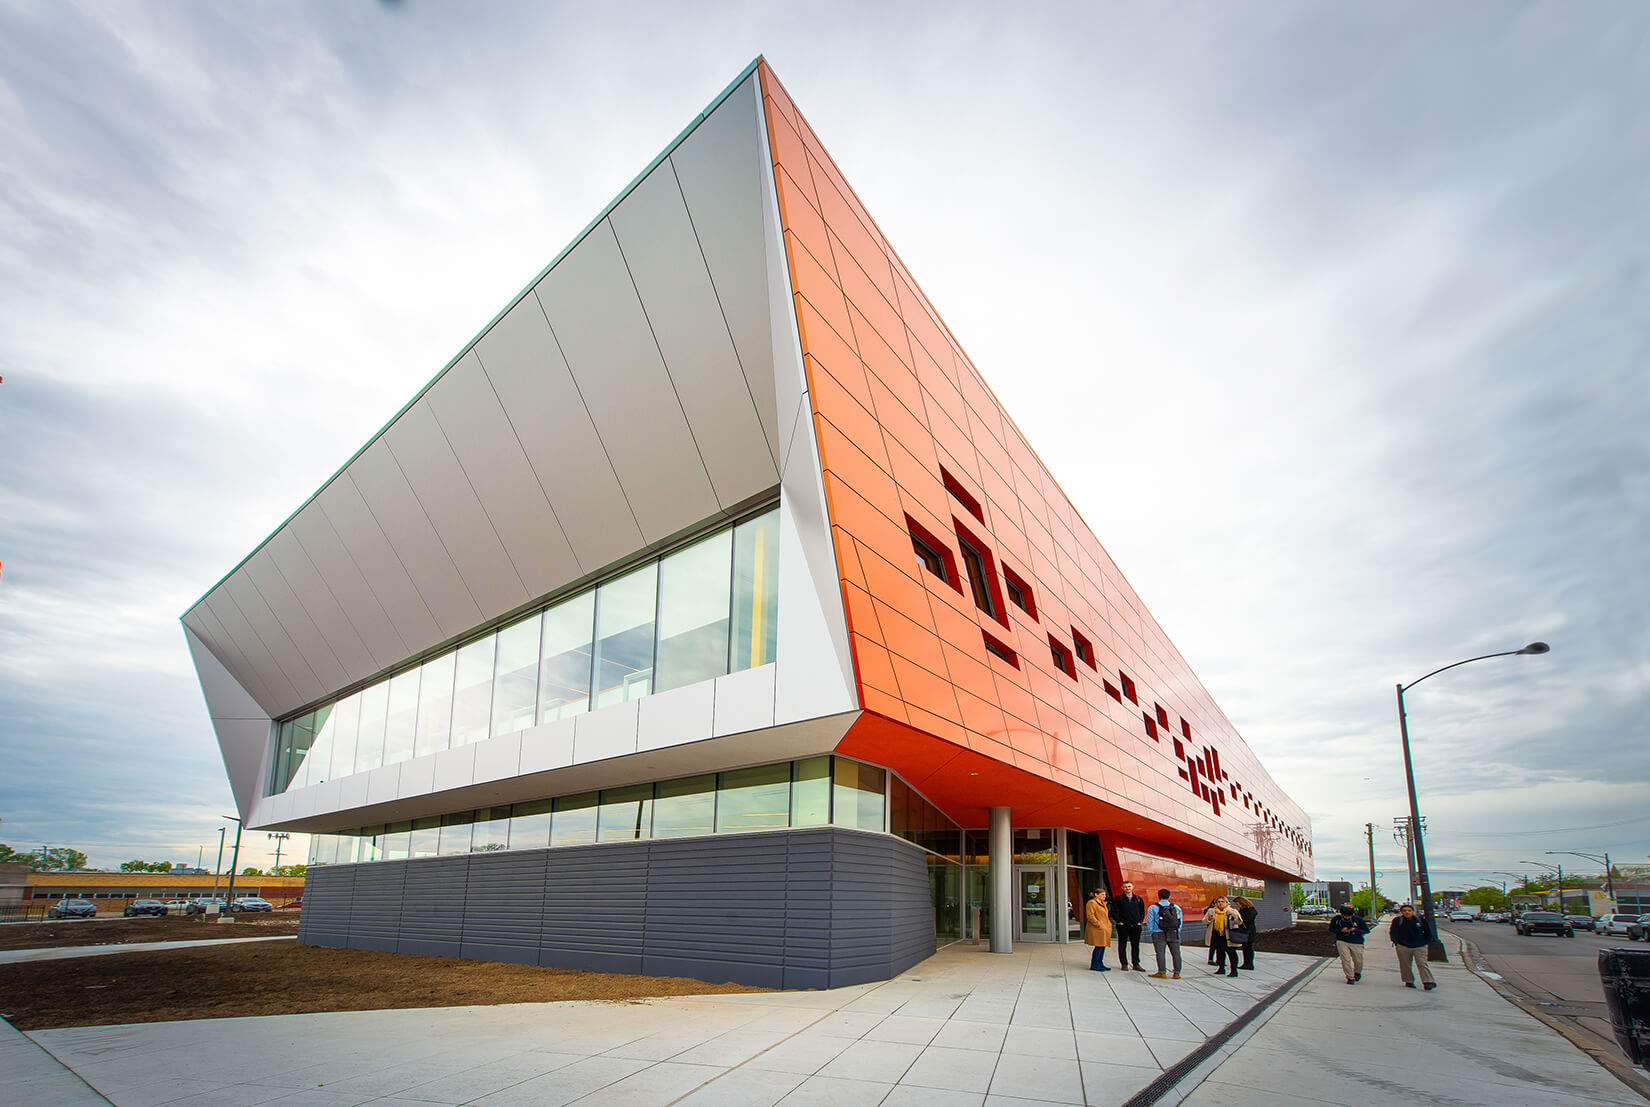 photograph depicting the exterior of a wellness campus in Chicago with an orange facade